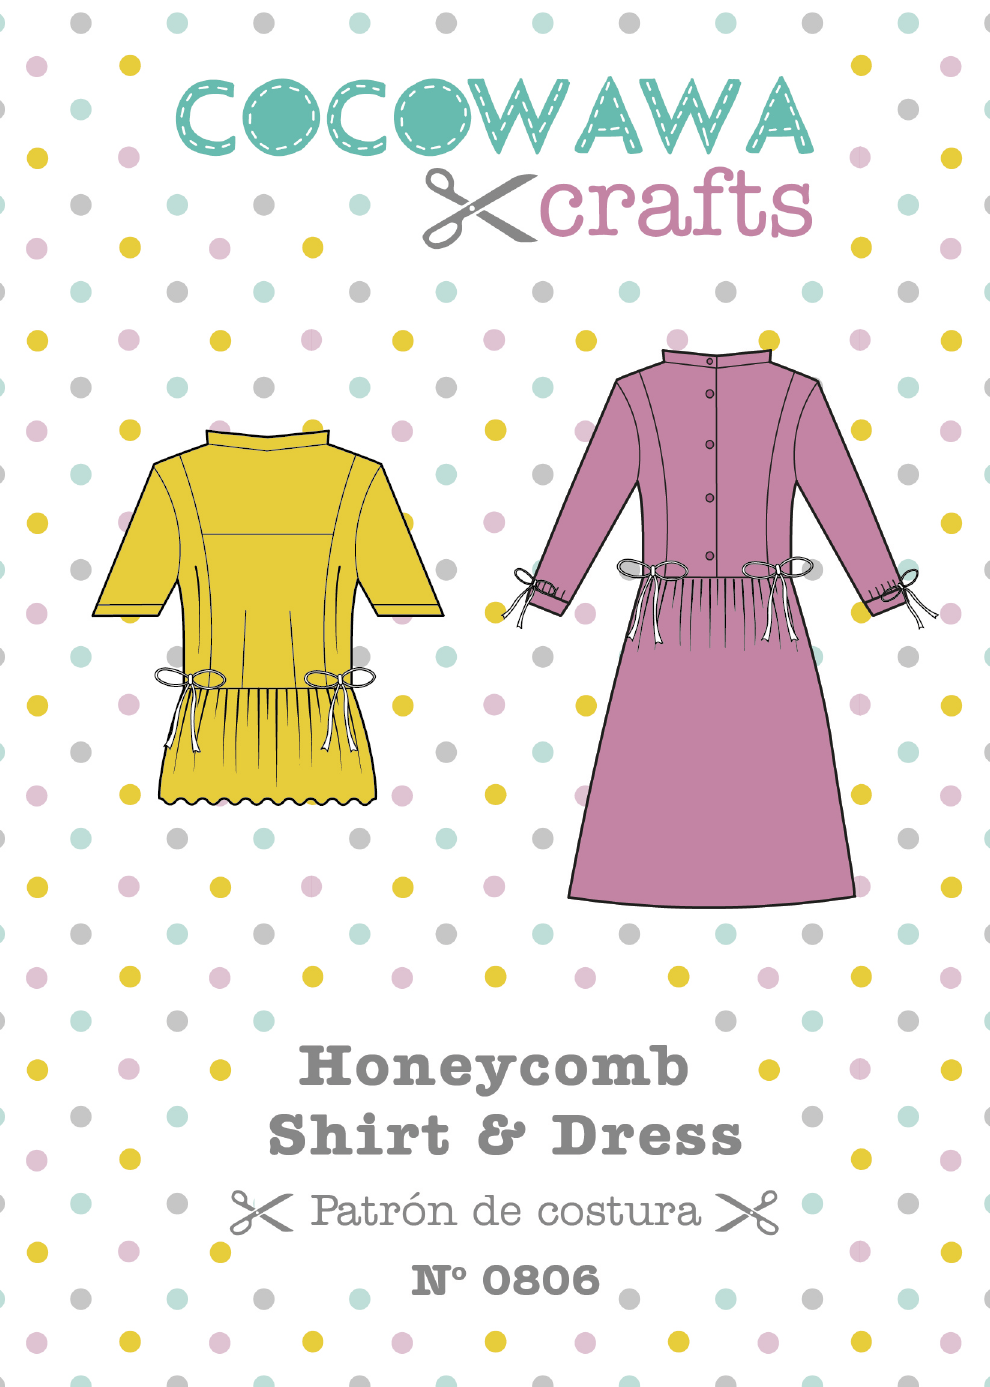 Honeycomb Shirt and Dress sewing pattern CocoWawa Crafts cover